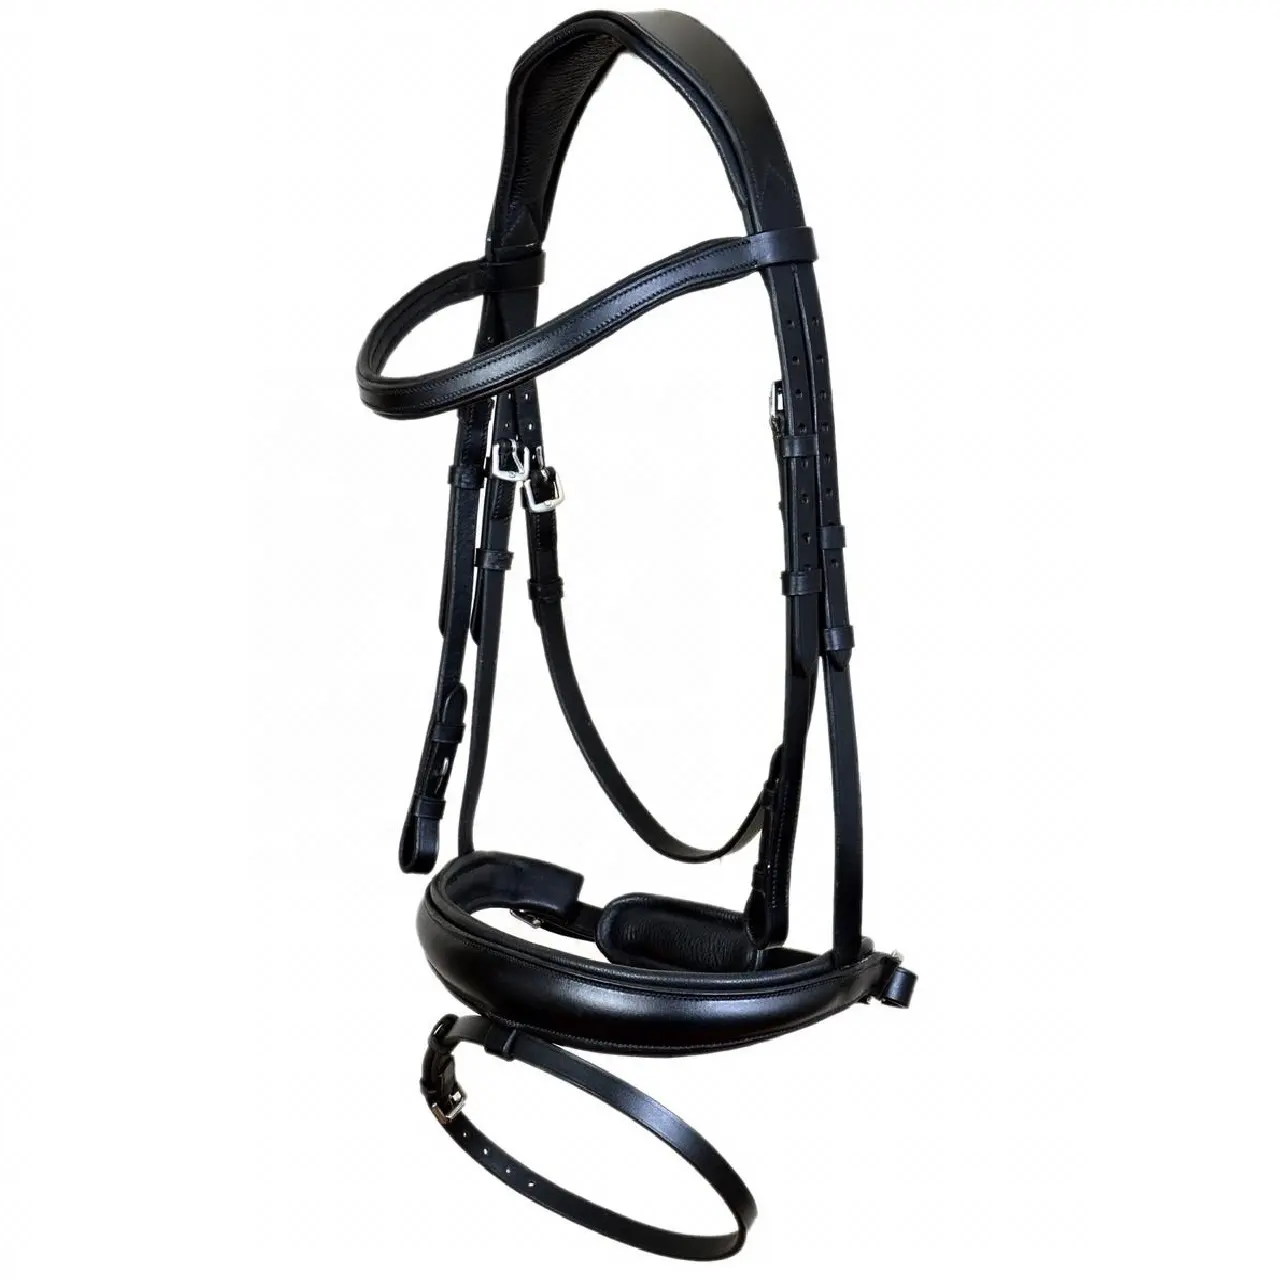 Wholesale Genuine Leather Bridle Best Quality Horse Leather Bridle Equipment At Good Price